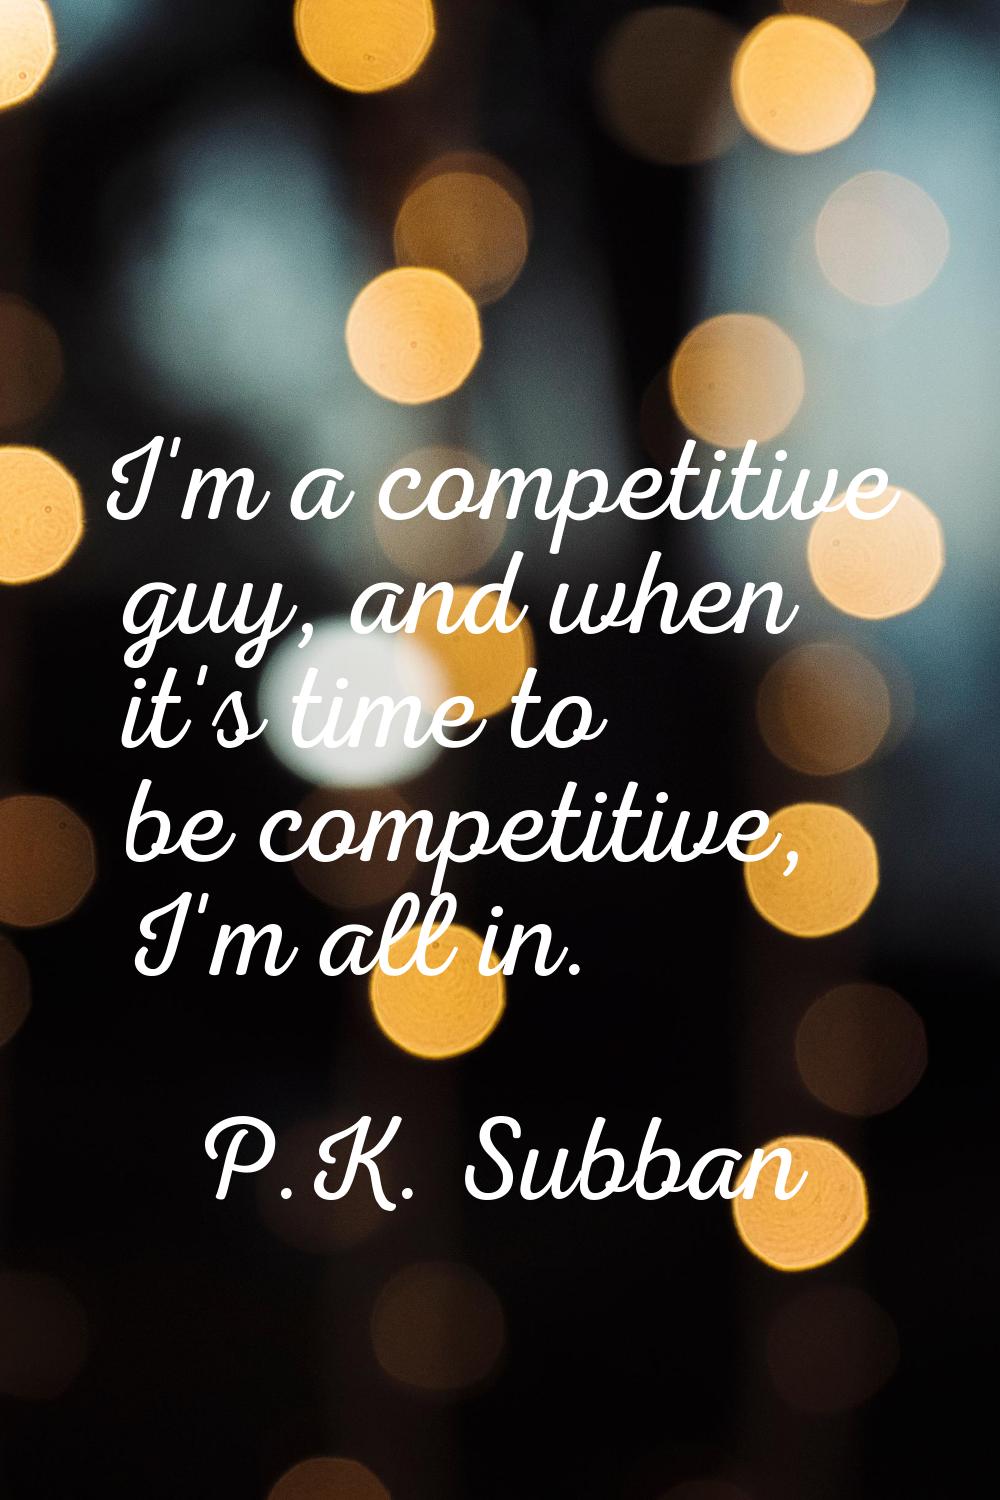 I'm a competitive guy, and when it's time to be competitive, I'm all in.